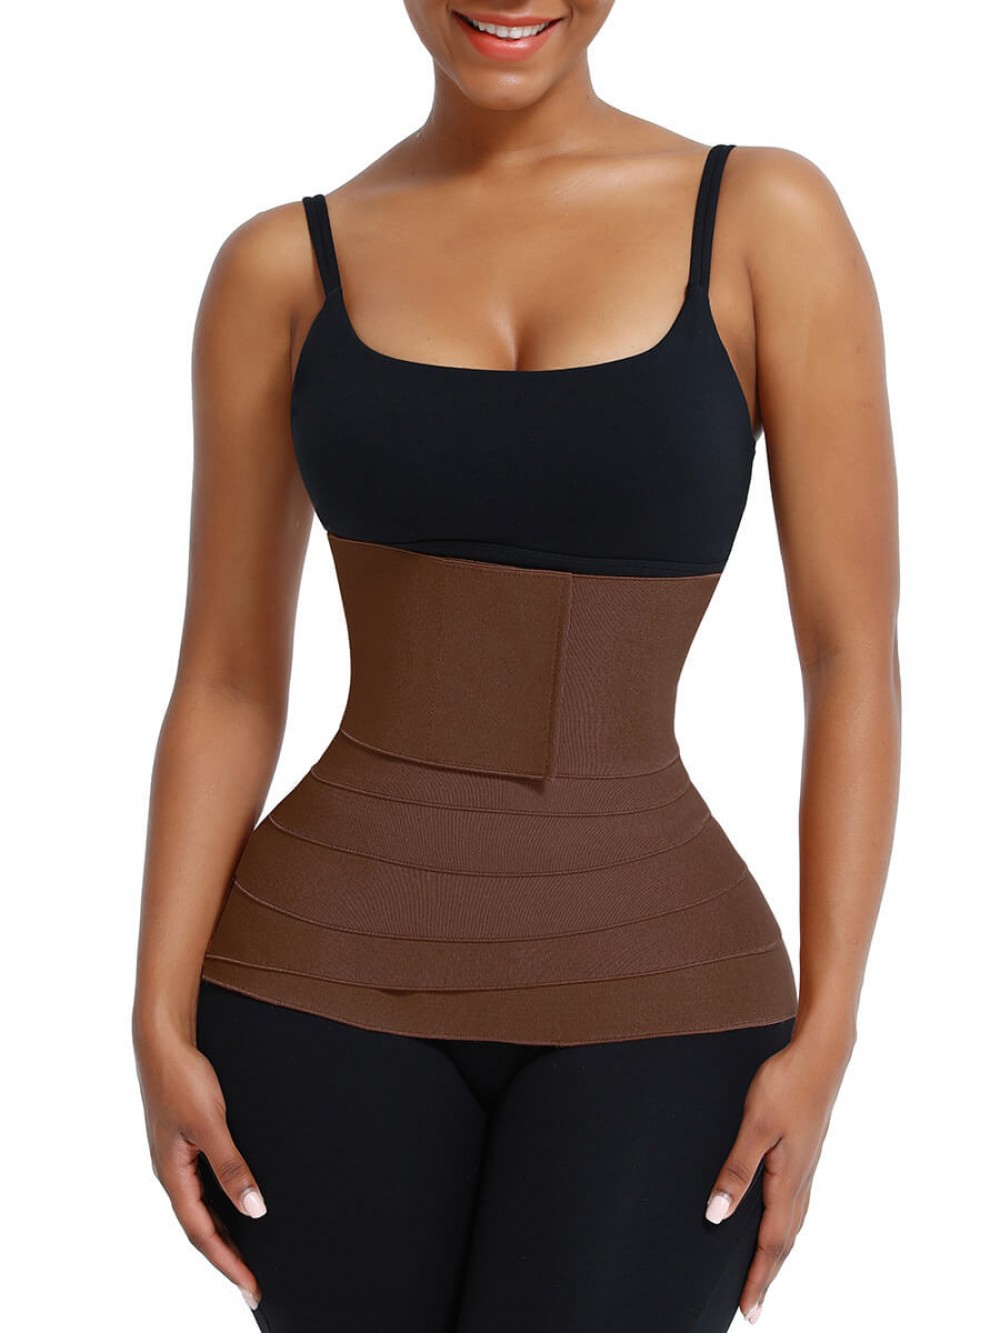 Brown Slimming Tummy Waist Control Wrap Body Shaper For Lose Weight